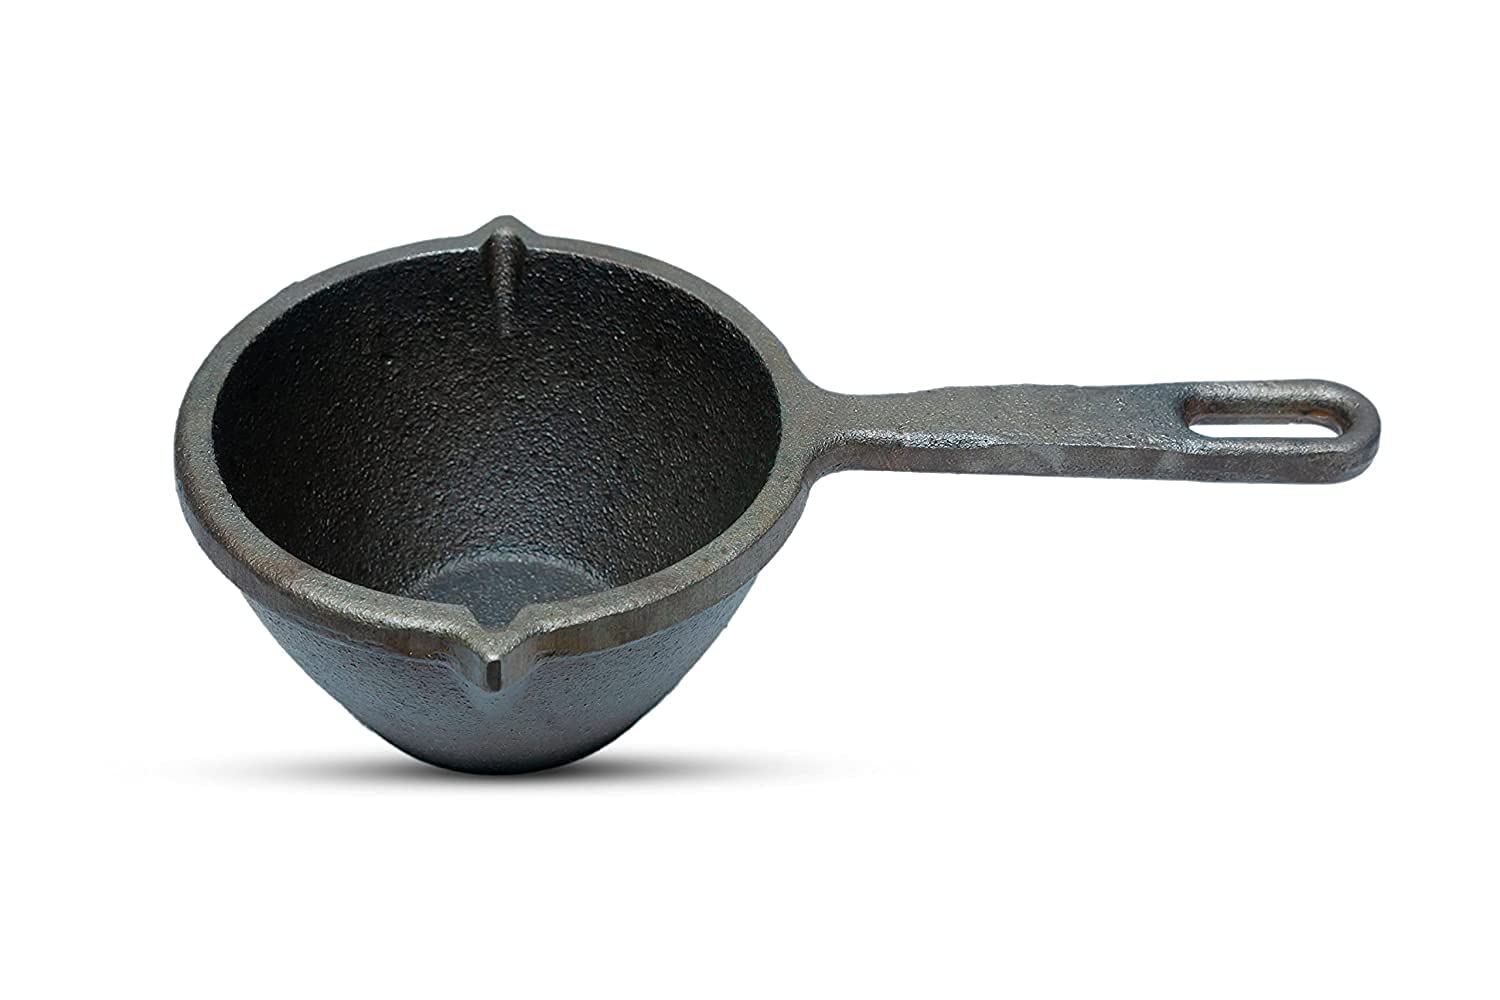 https://www.rudraeco.com/wp-content/uploads/2022/02/RudraEco-Pre-Seasoned-Cast-Iron-Sauce-Bowl-4-Inches-1.jpg